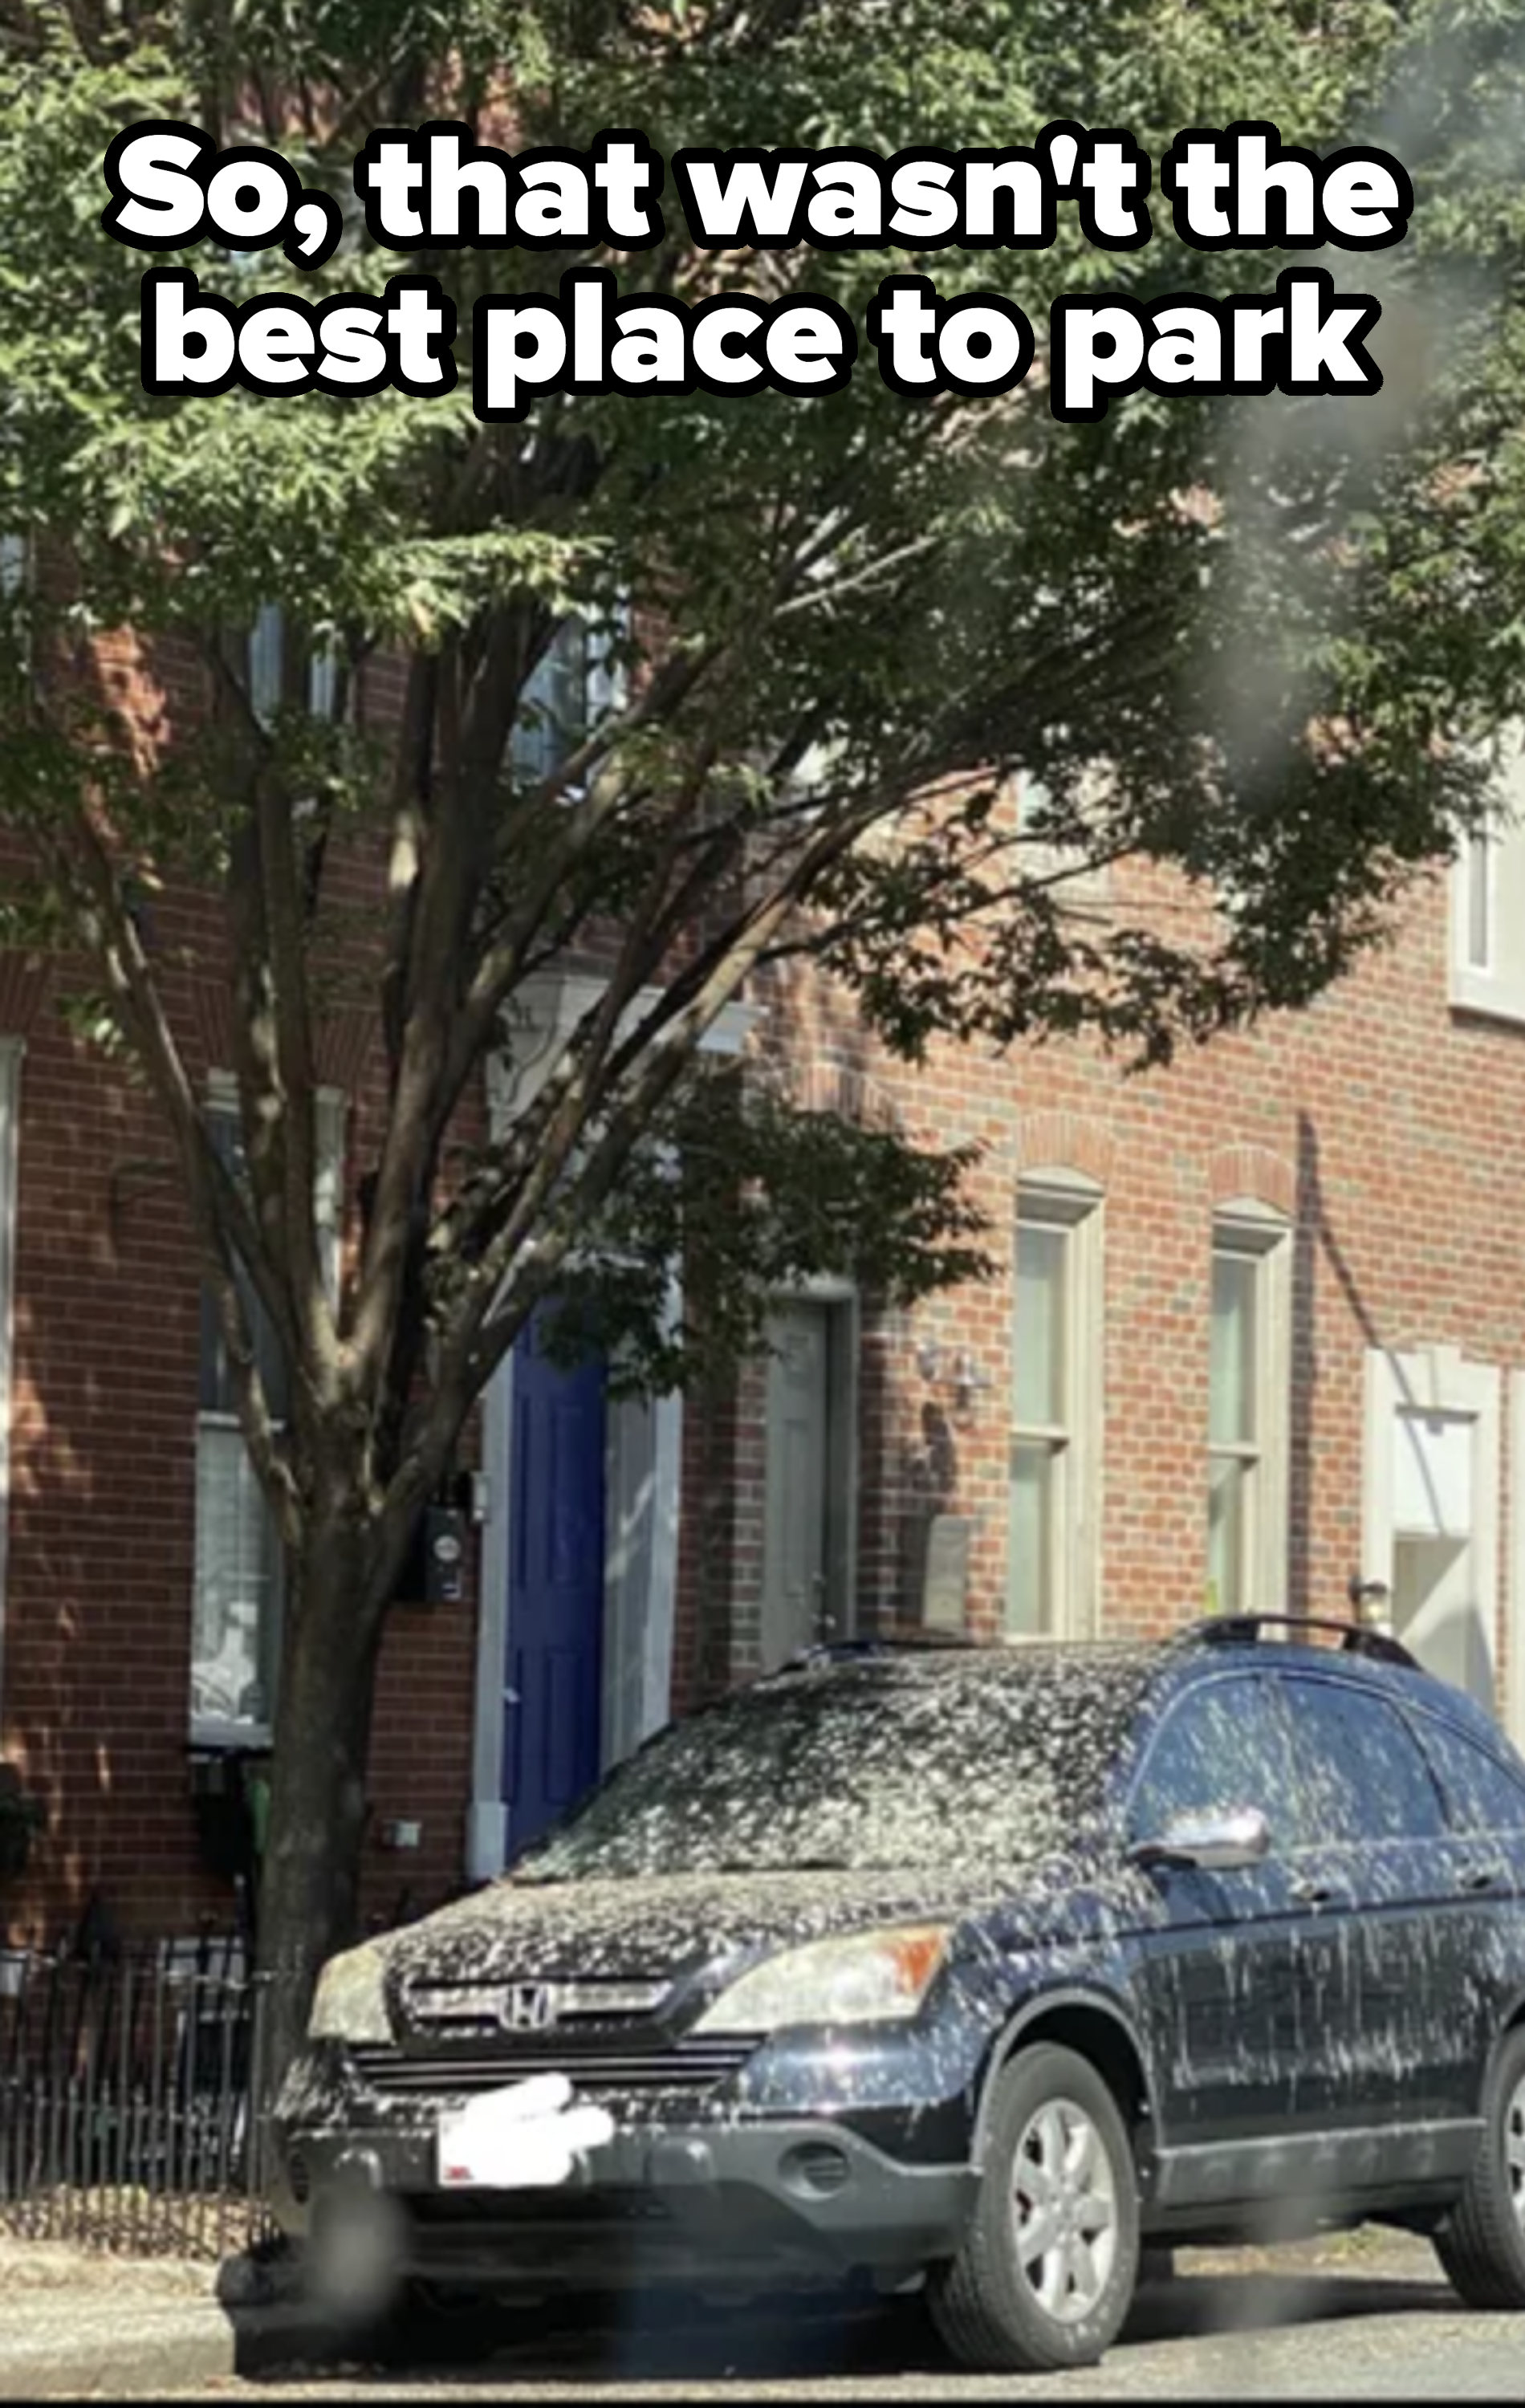 Car covered in bird droppings parked in front of a building with a tree nearby